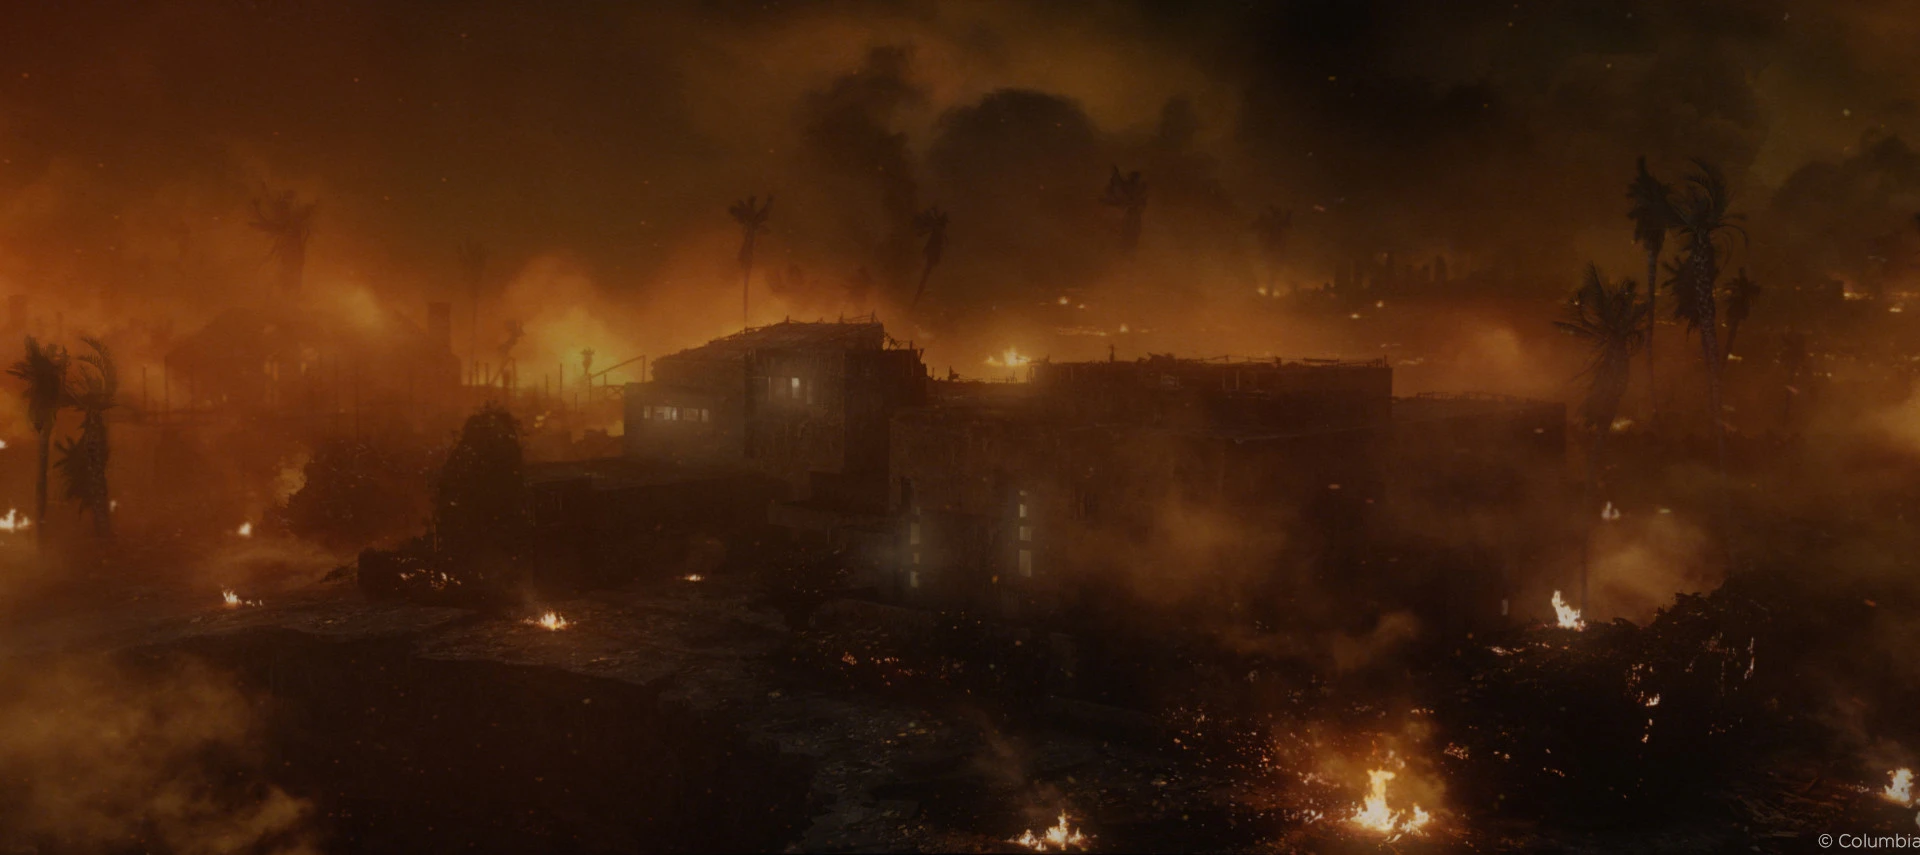 Apocalyptic view in This is the end from Raynault vfx